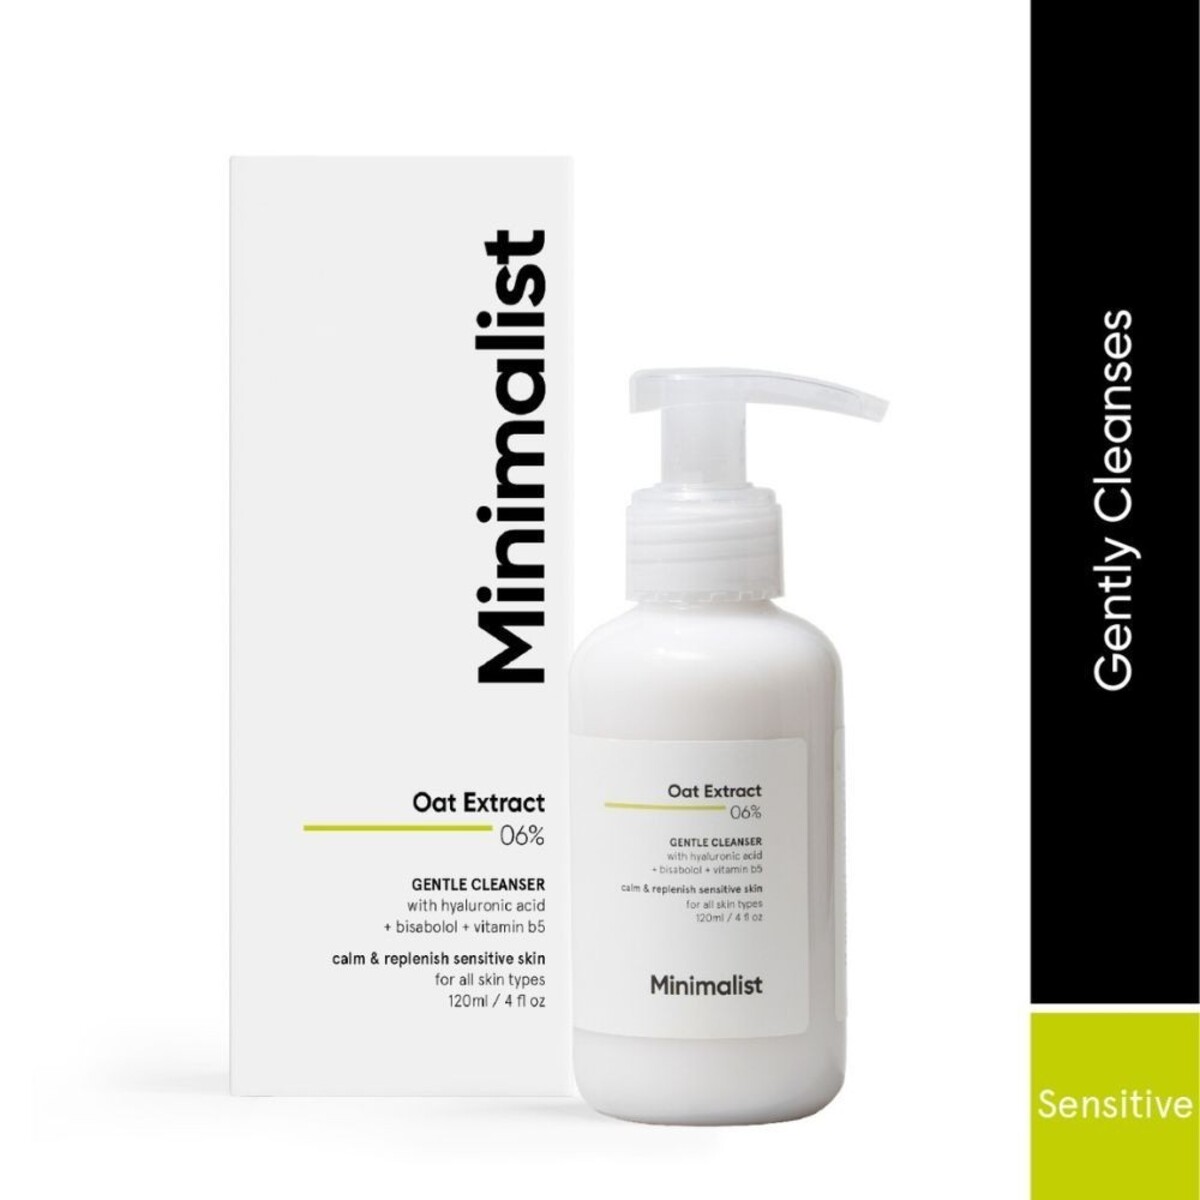 MINIMALIST  6% Oat Extract Cleanser For Sensitive Skin  120ml